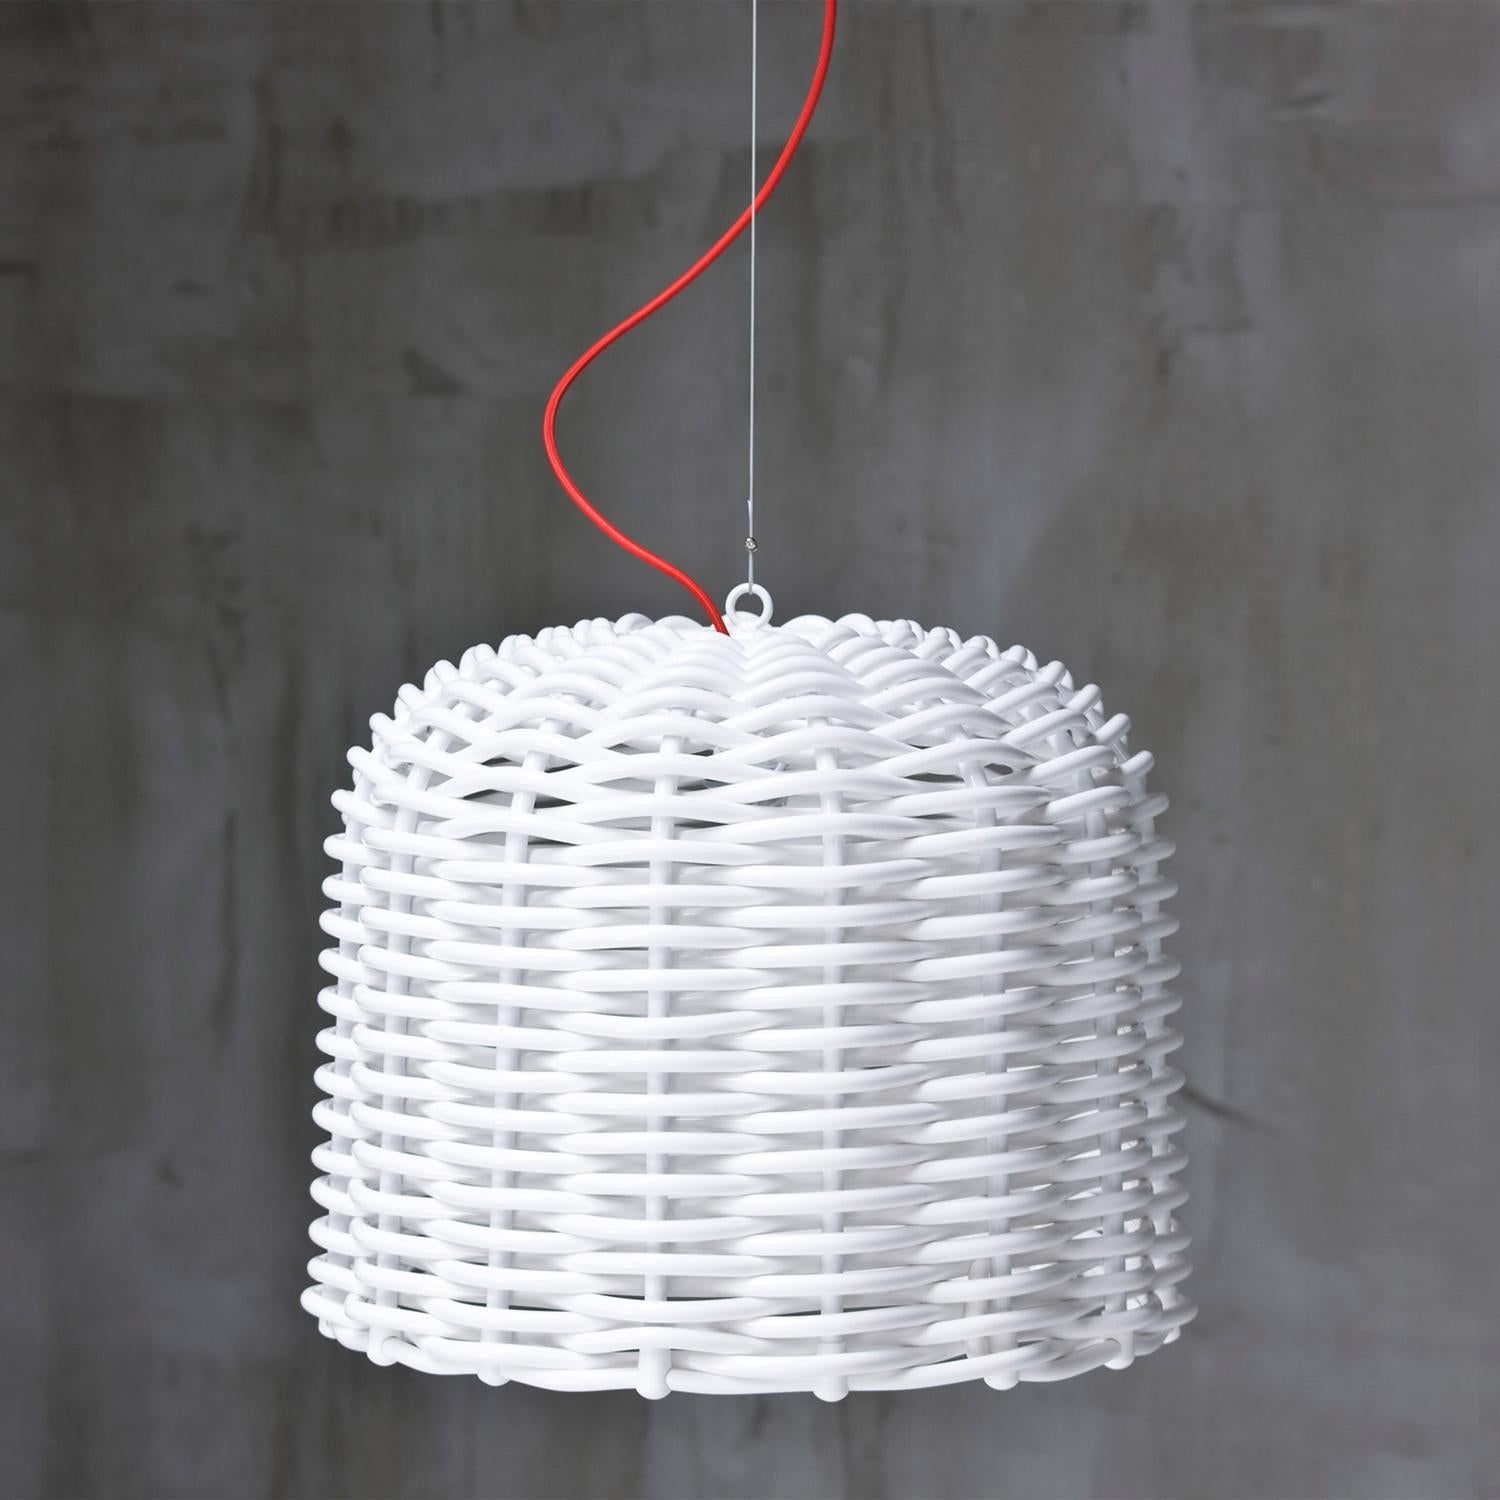 Suspension Ambra high white all in woven PVC in white glossy finish.
For 1 bulb, lamp holder type E27, max 18 Watt, 220 Volts.
Bulb not included. Delivered with 250cm electric cable and 
with 200 cm steel cable.
Also available in woven PVC in